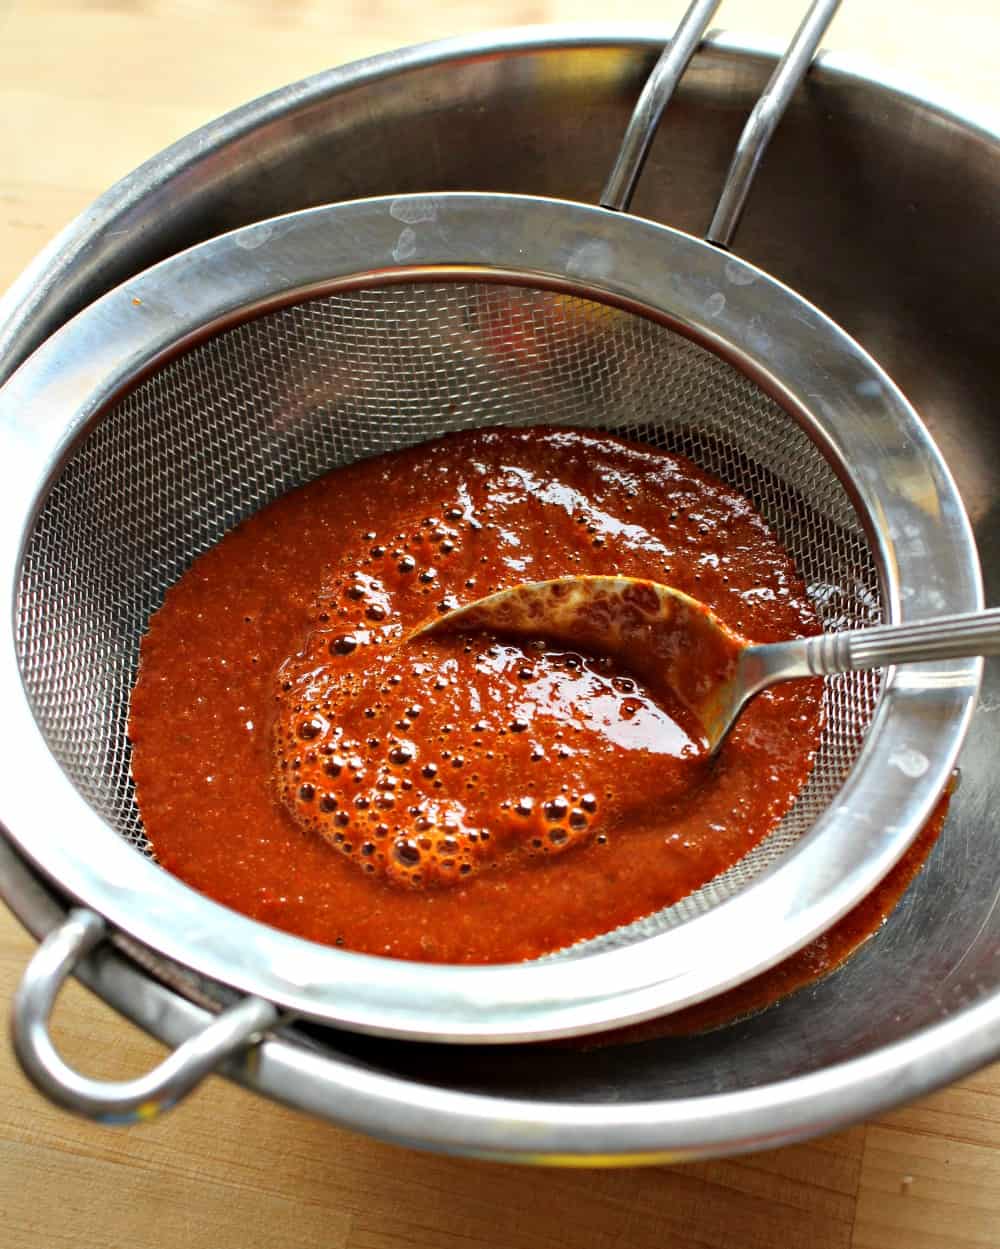 An image showing how to strain the chile sauce.